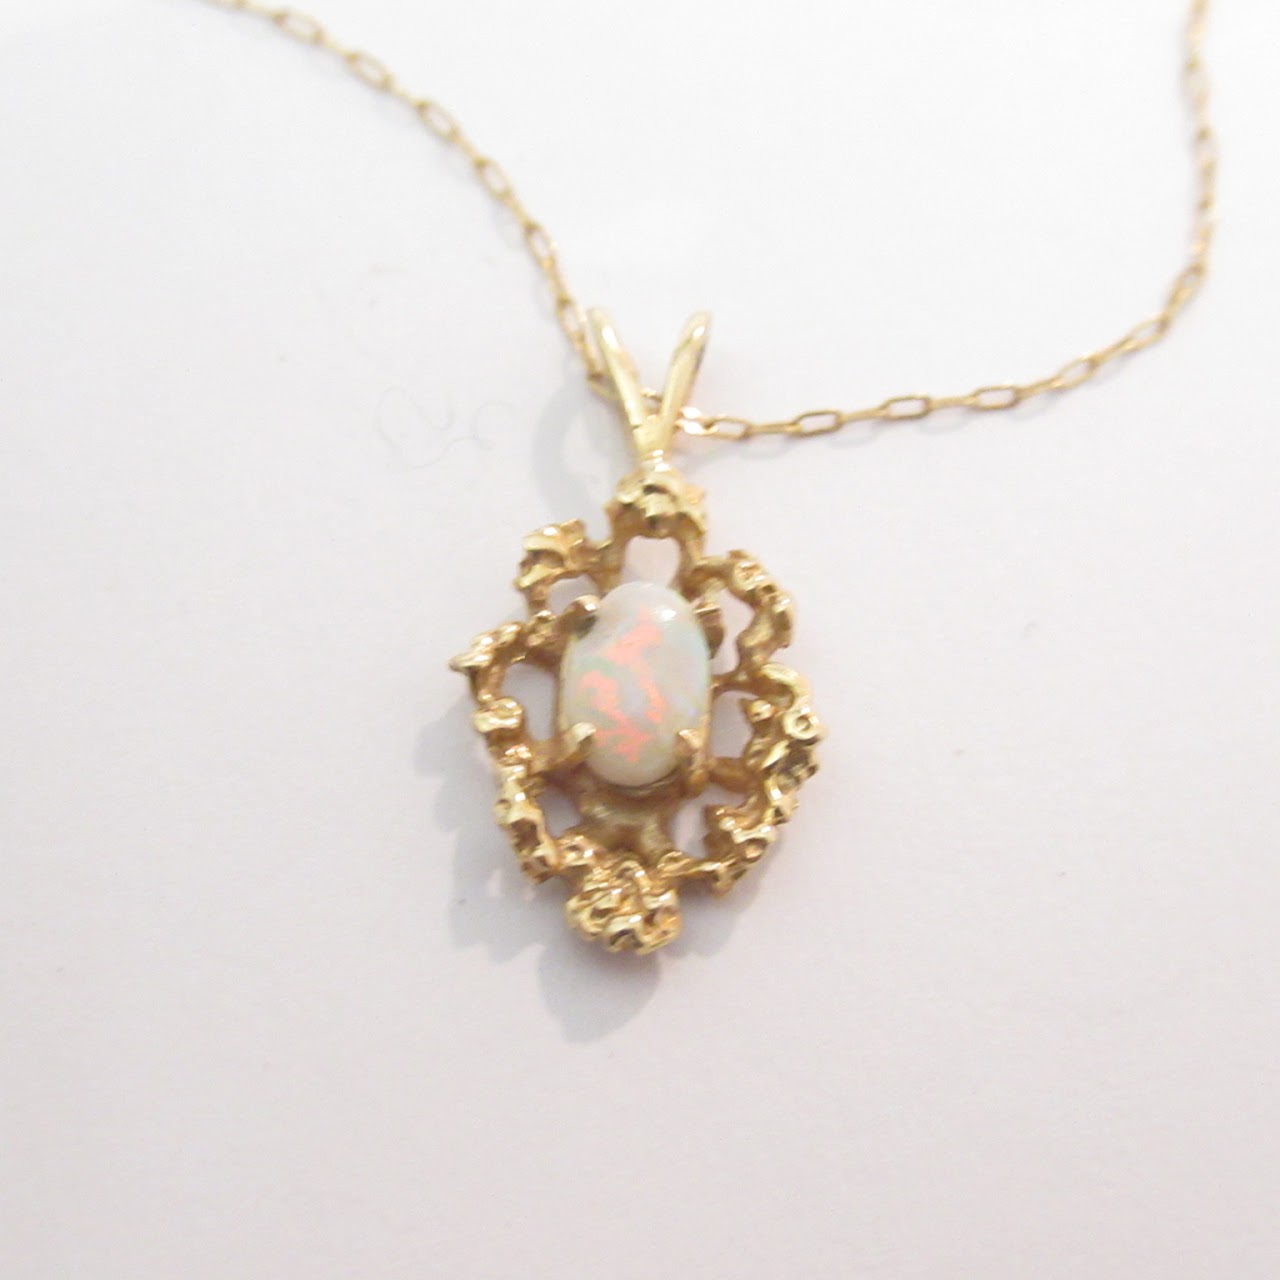 14K Gold and Opalite Pendant Necklace